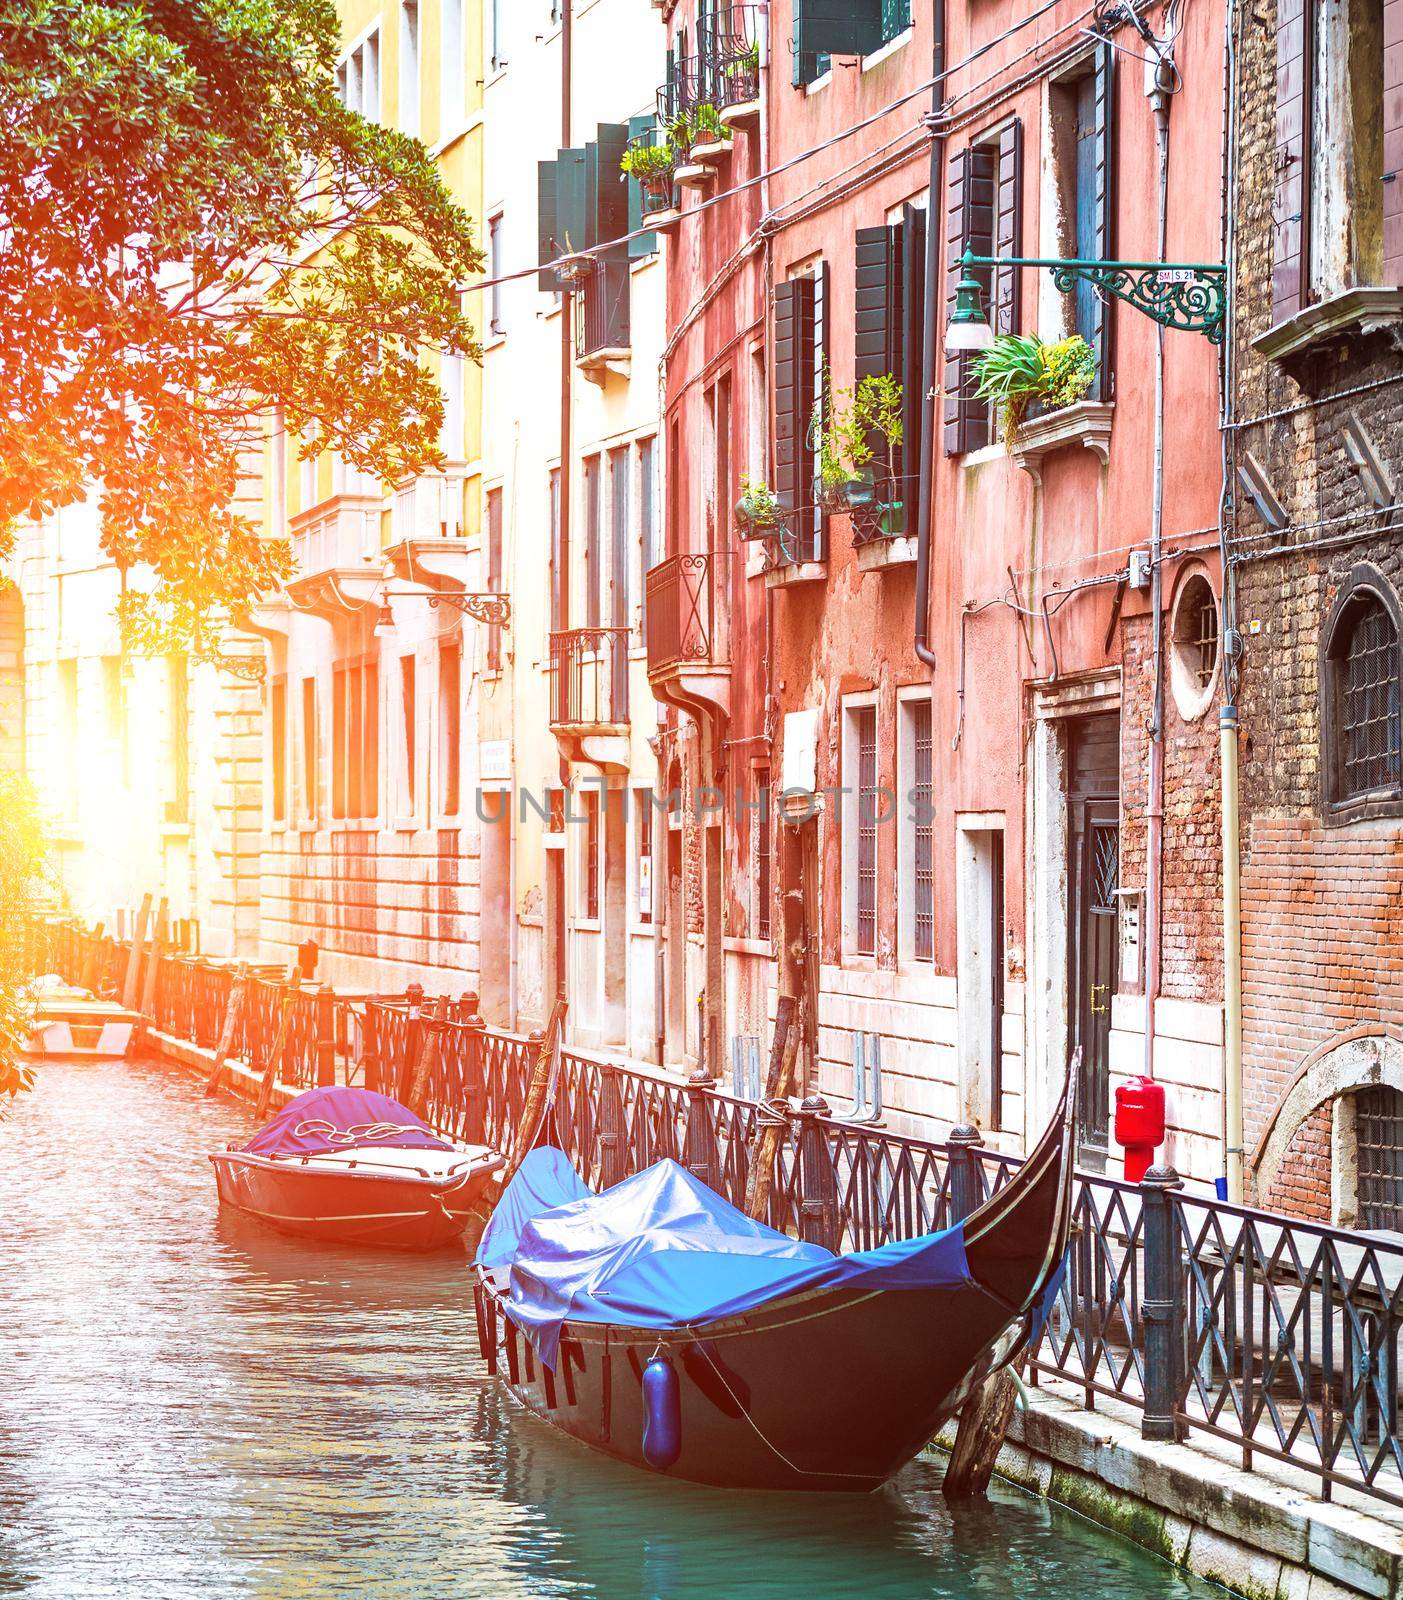 Venice, Italy, boats along the canal and historic tenements